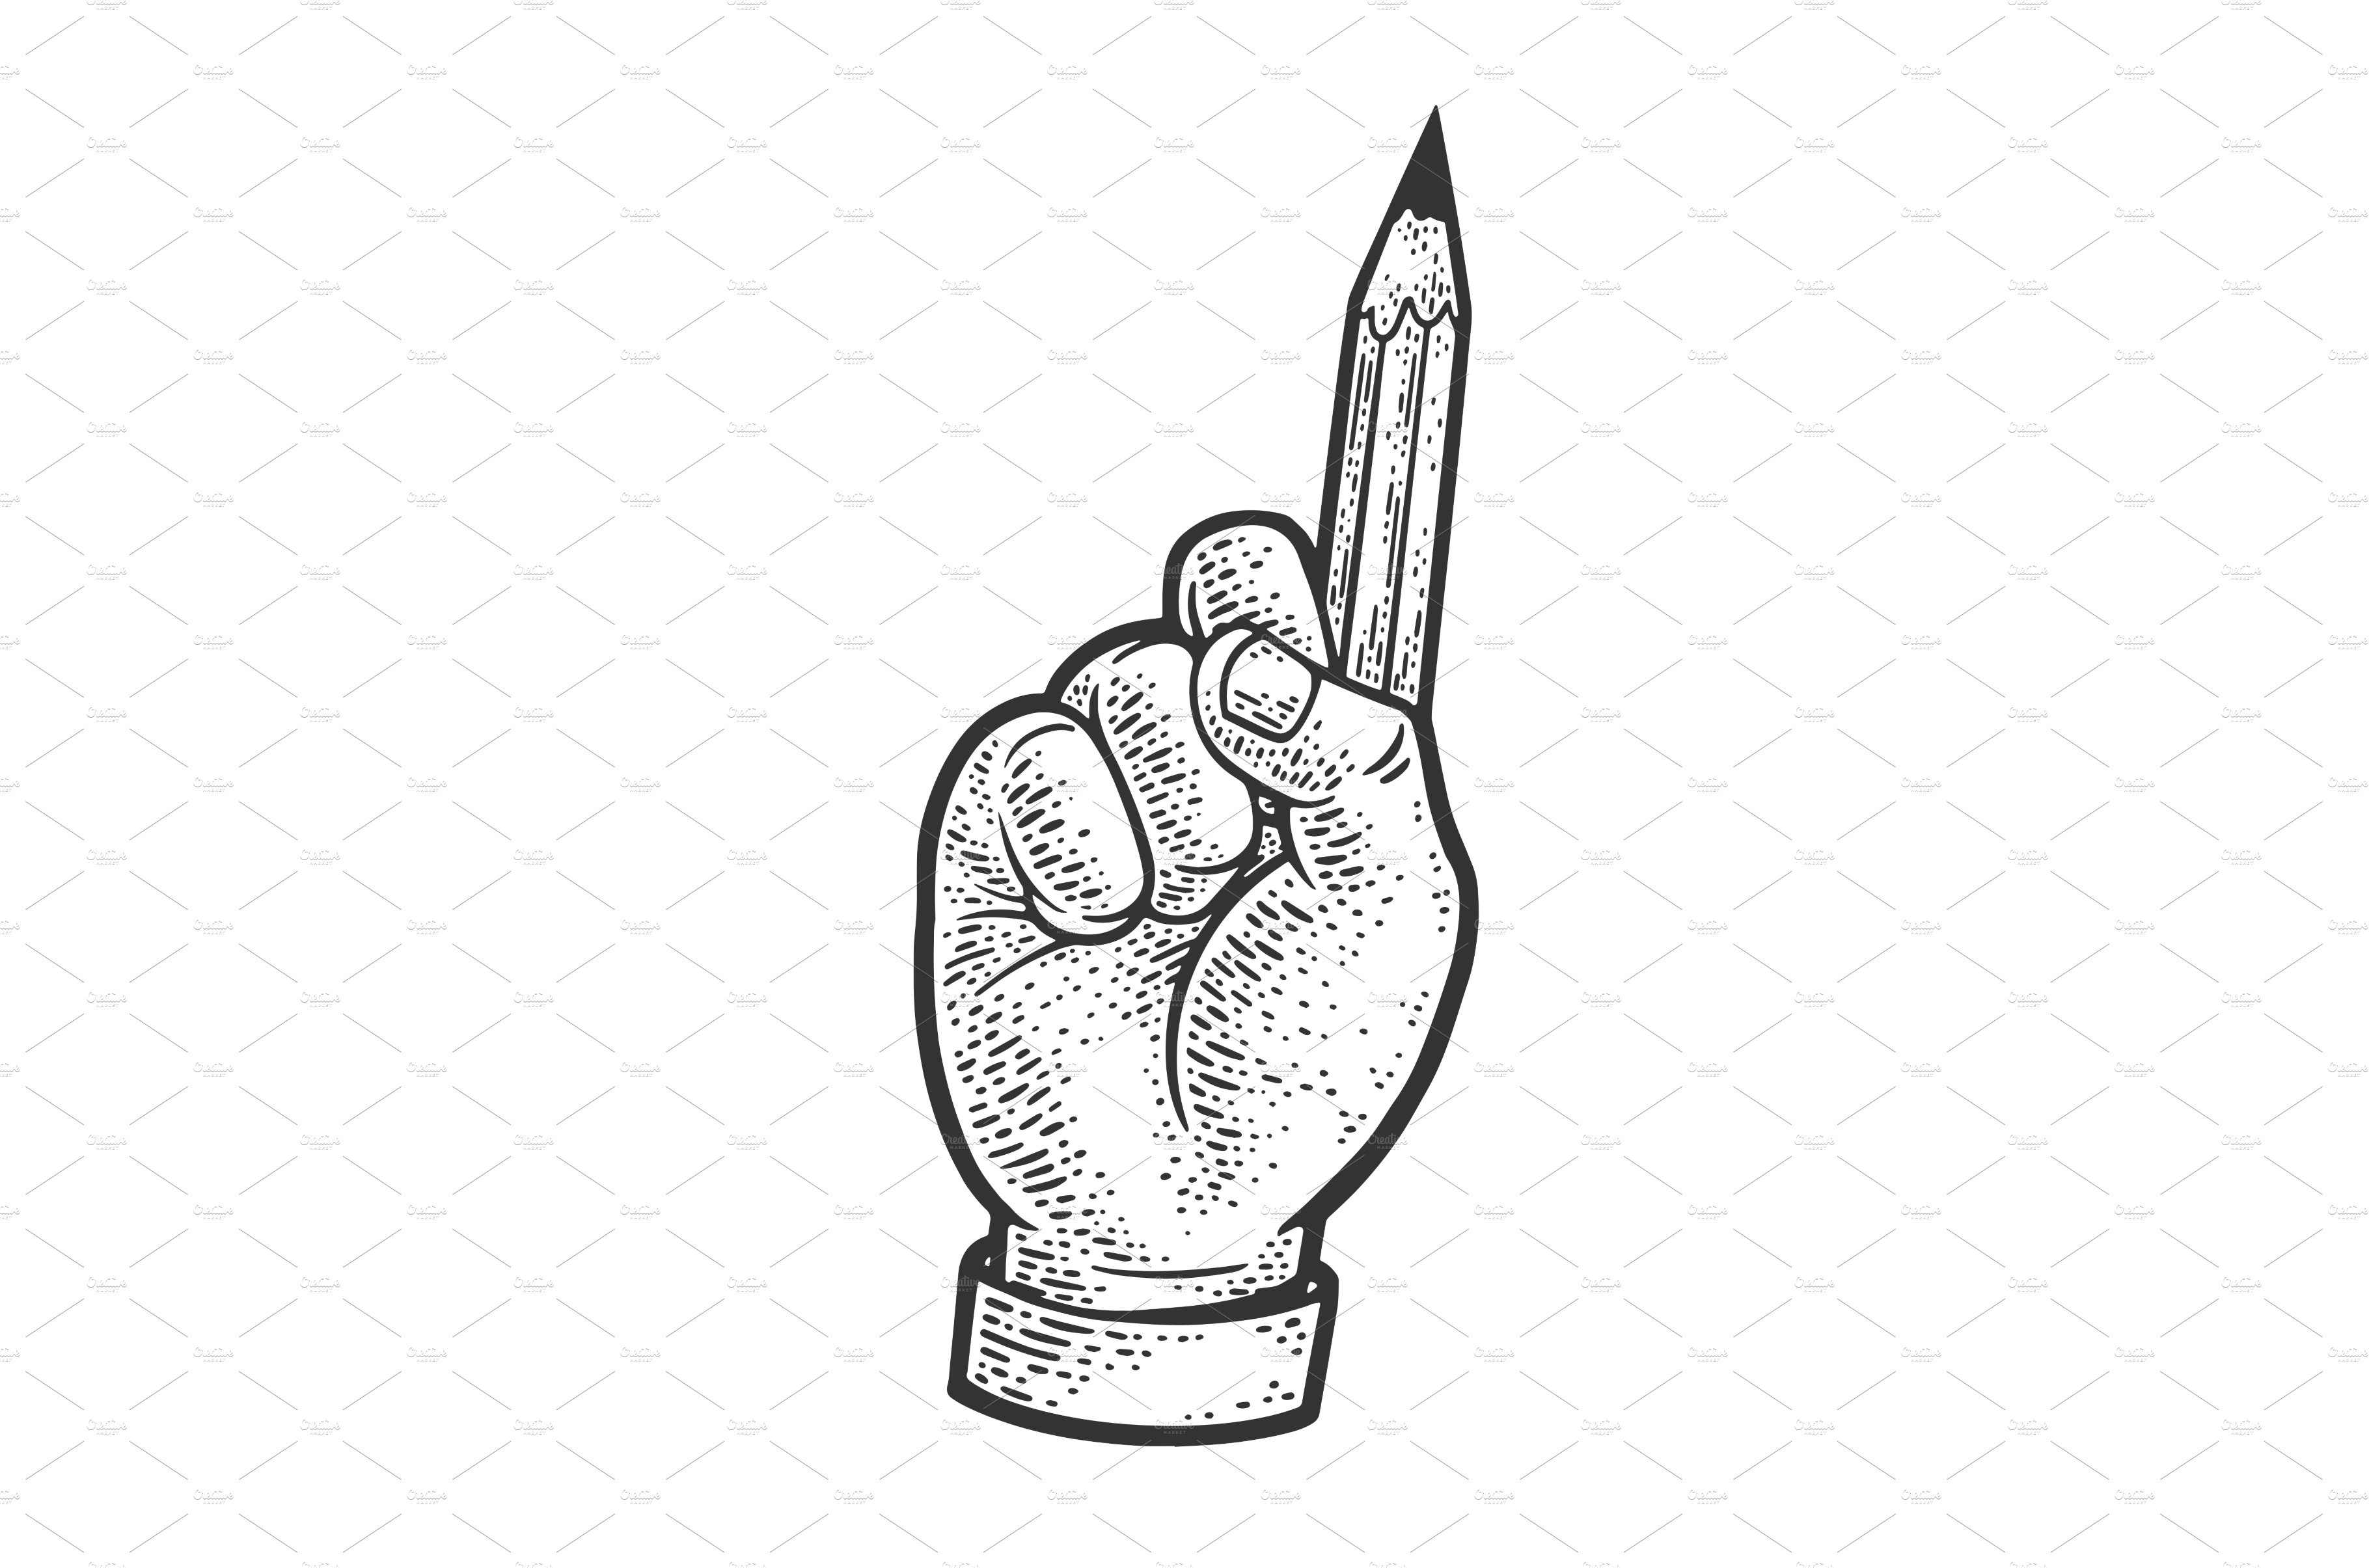 Pencil finger hand sketch vector cover image.